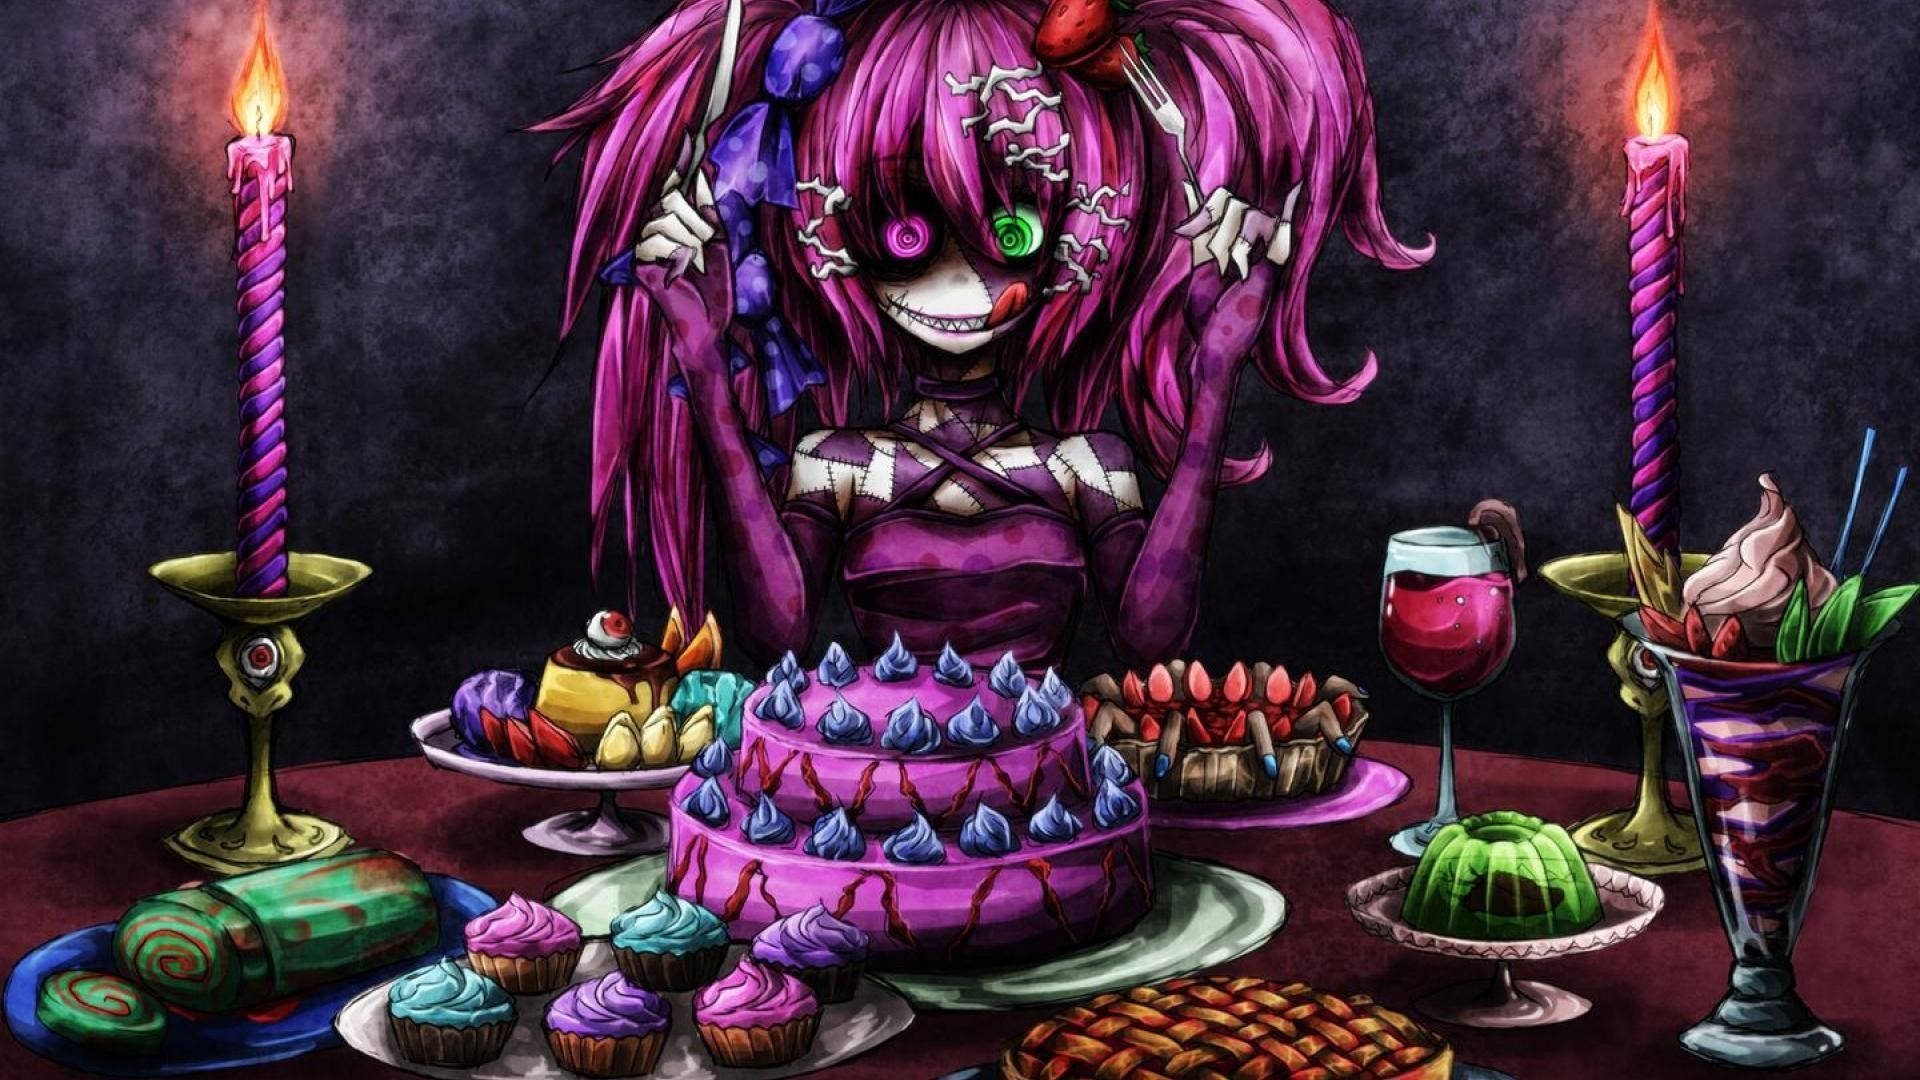 A Girl With Purple Hair Sitting At A Table With Candles And Cake Wallpaper